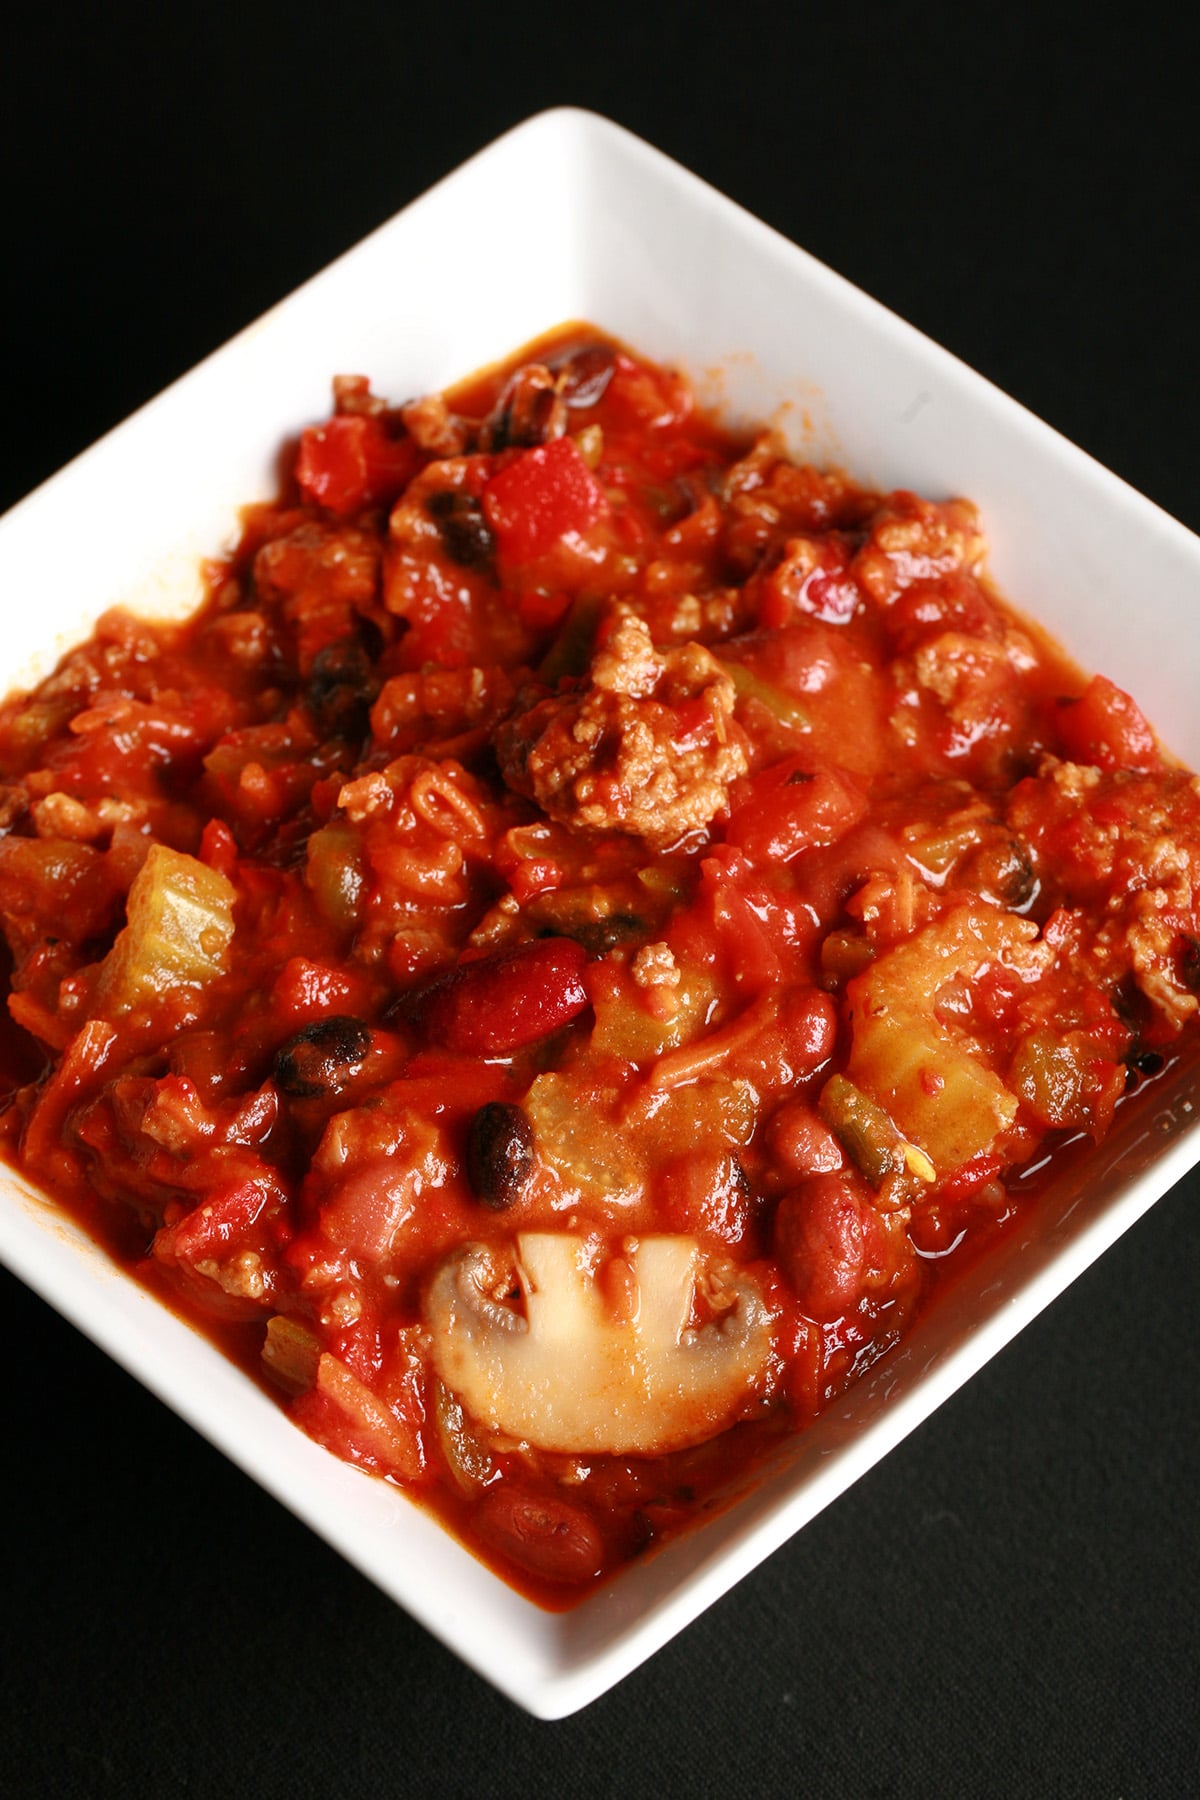 Close up photo of a bowl of chili. Kidney beans, ground beef, mushrooms, celery, and red peppers are visible.